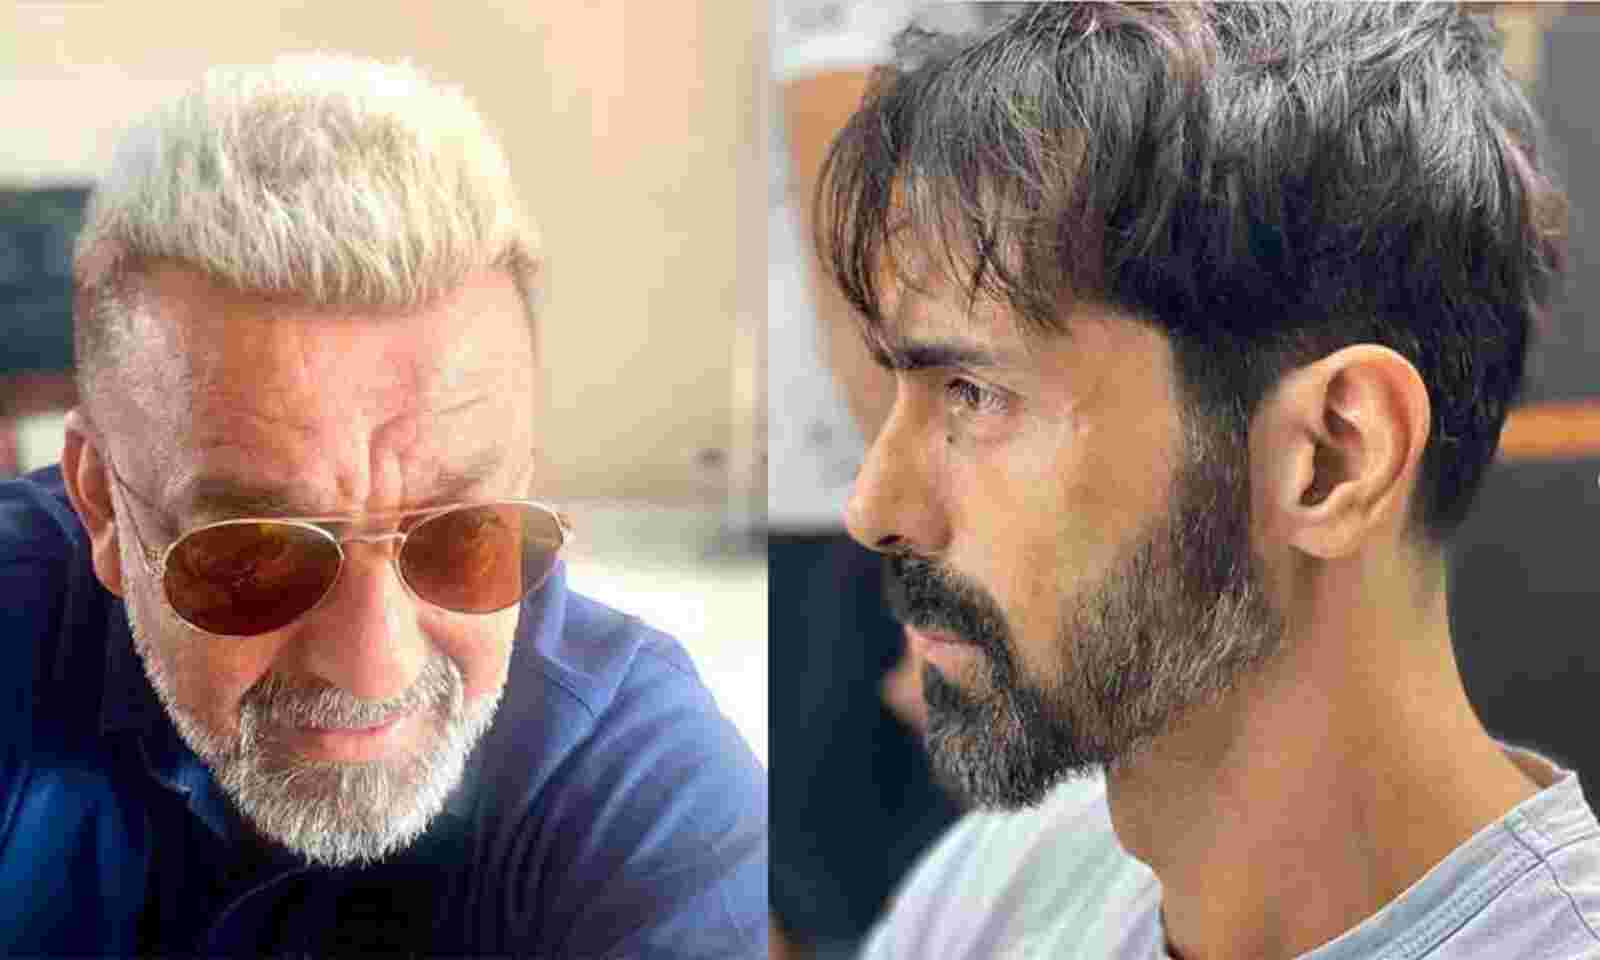 Sanjay Dutt's cool hairdo makes him look unrecognisable, check it out